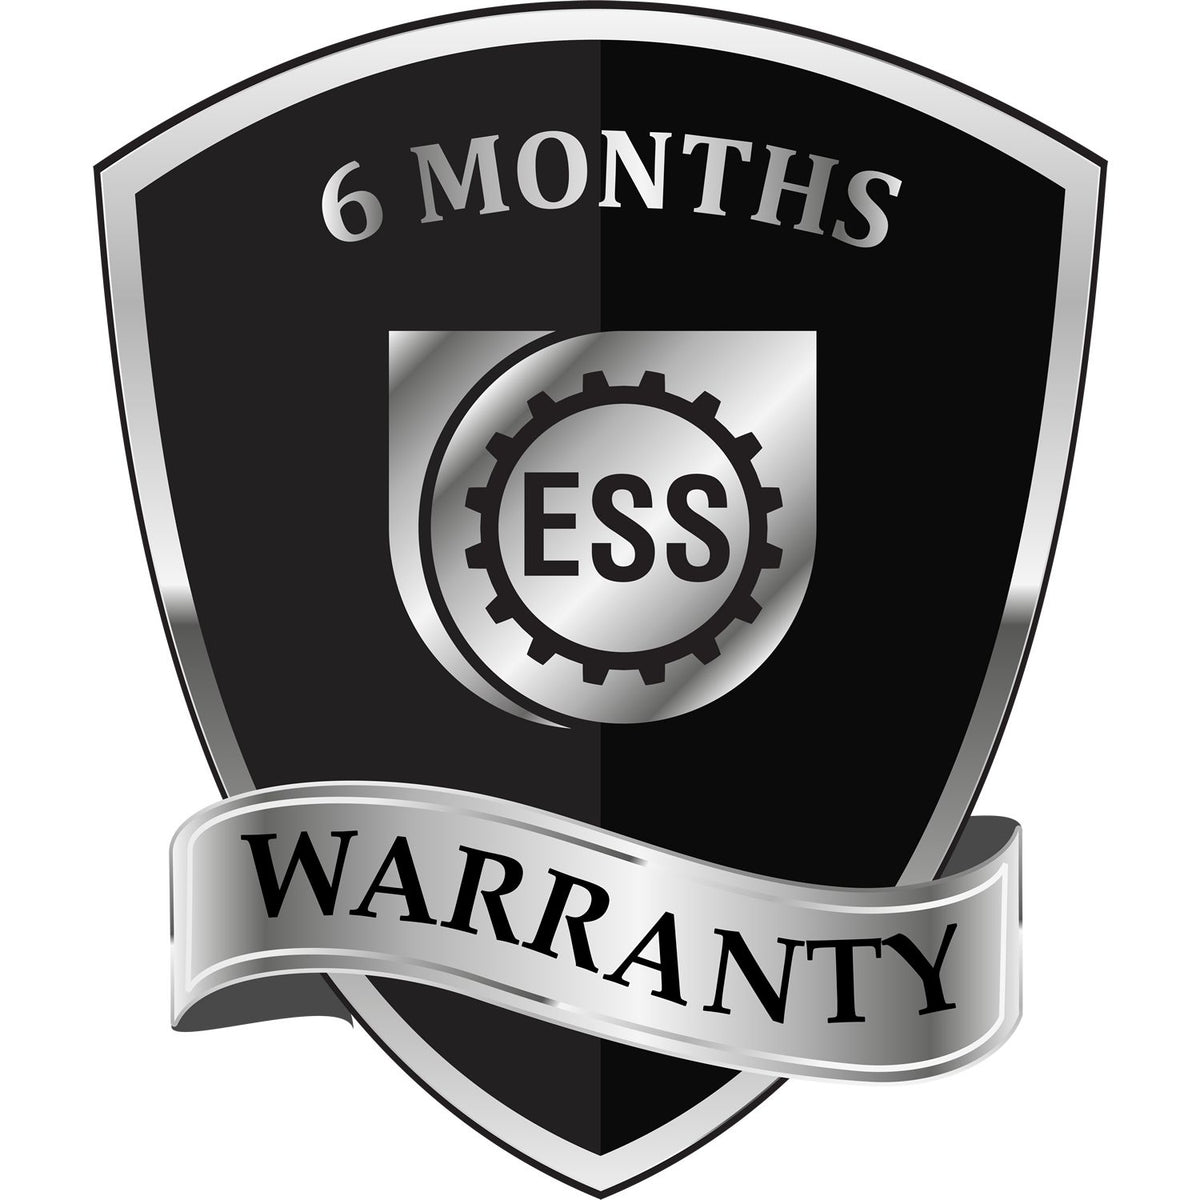 Large Narrow Expedite Rubber Stamp 4863R 6 Month Warranty